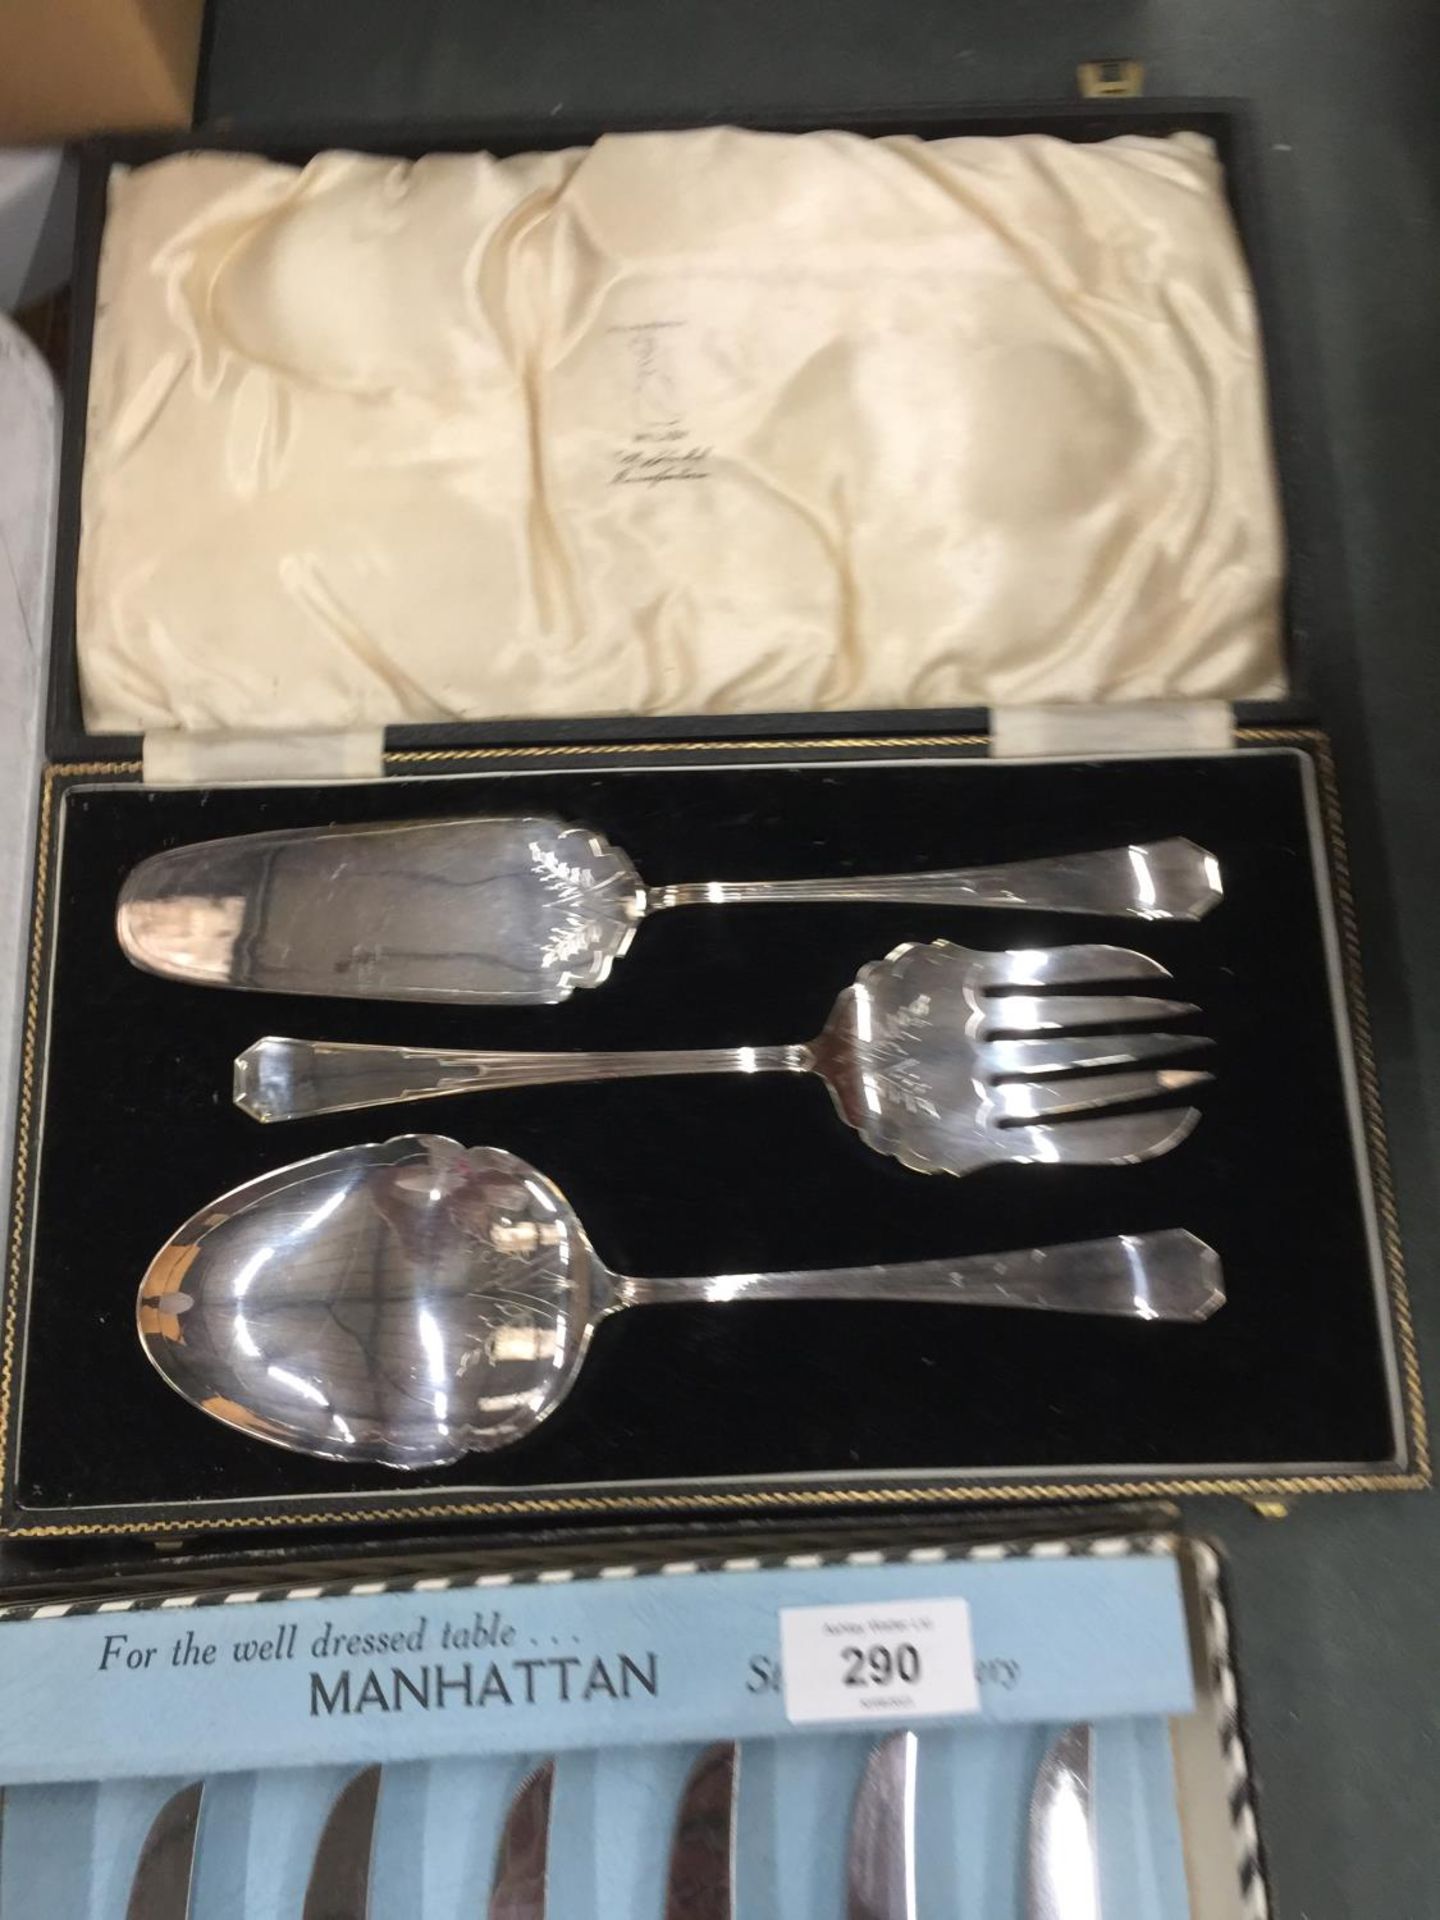 A QUANTITY OF BOXED MANHATTAN STAINLESS CUTLERY TOGETHER WITH A MY LADY SHEFFIELD CAKE SET - Image 3 of 3